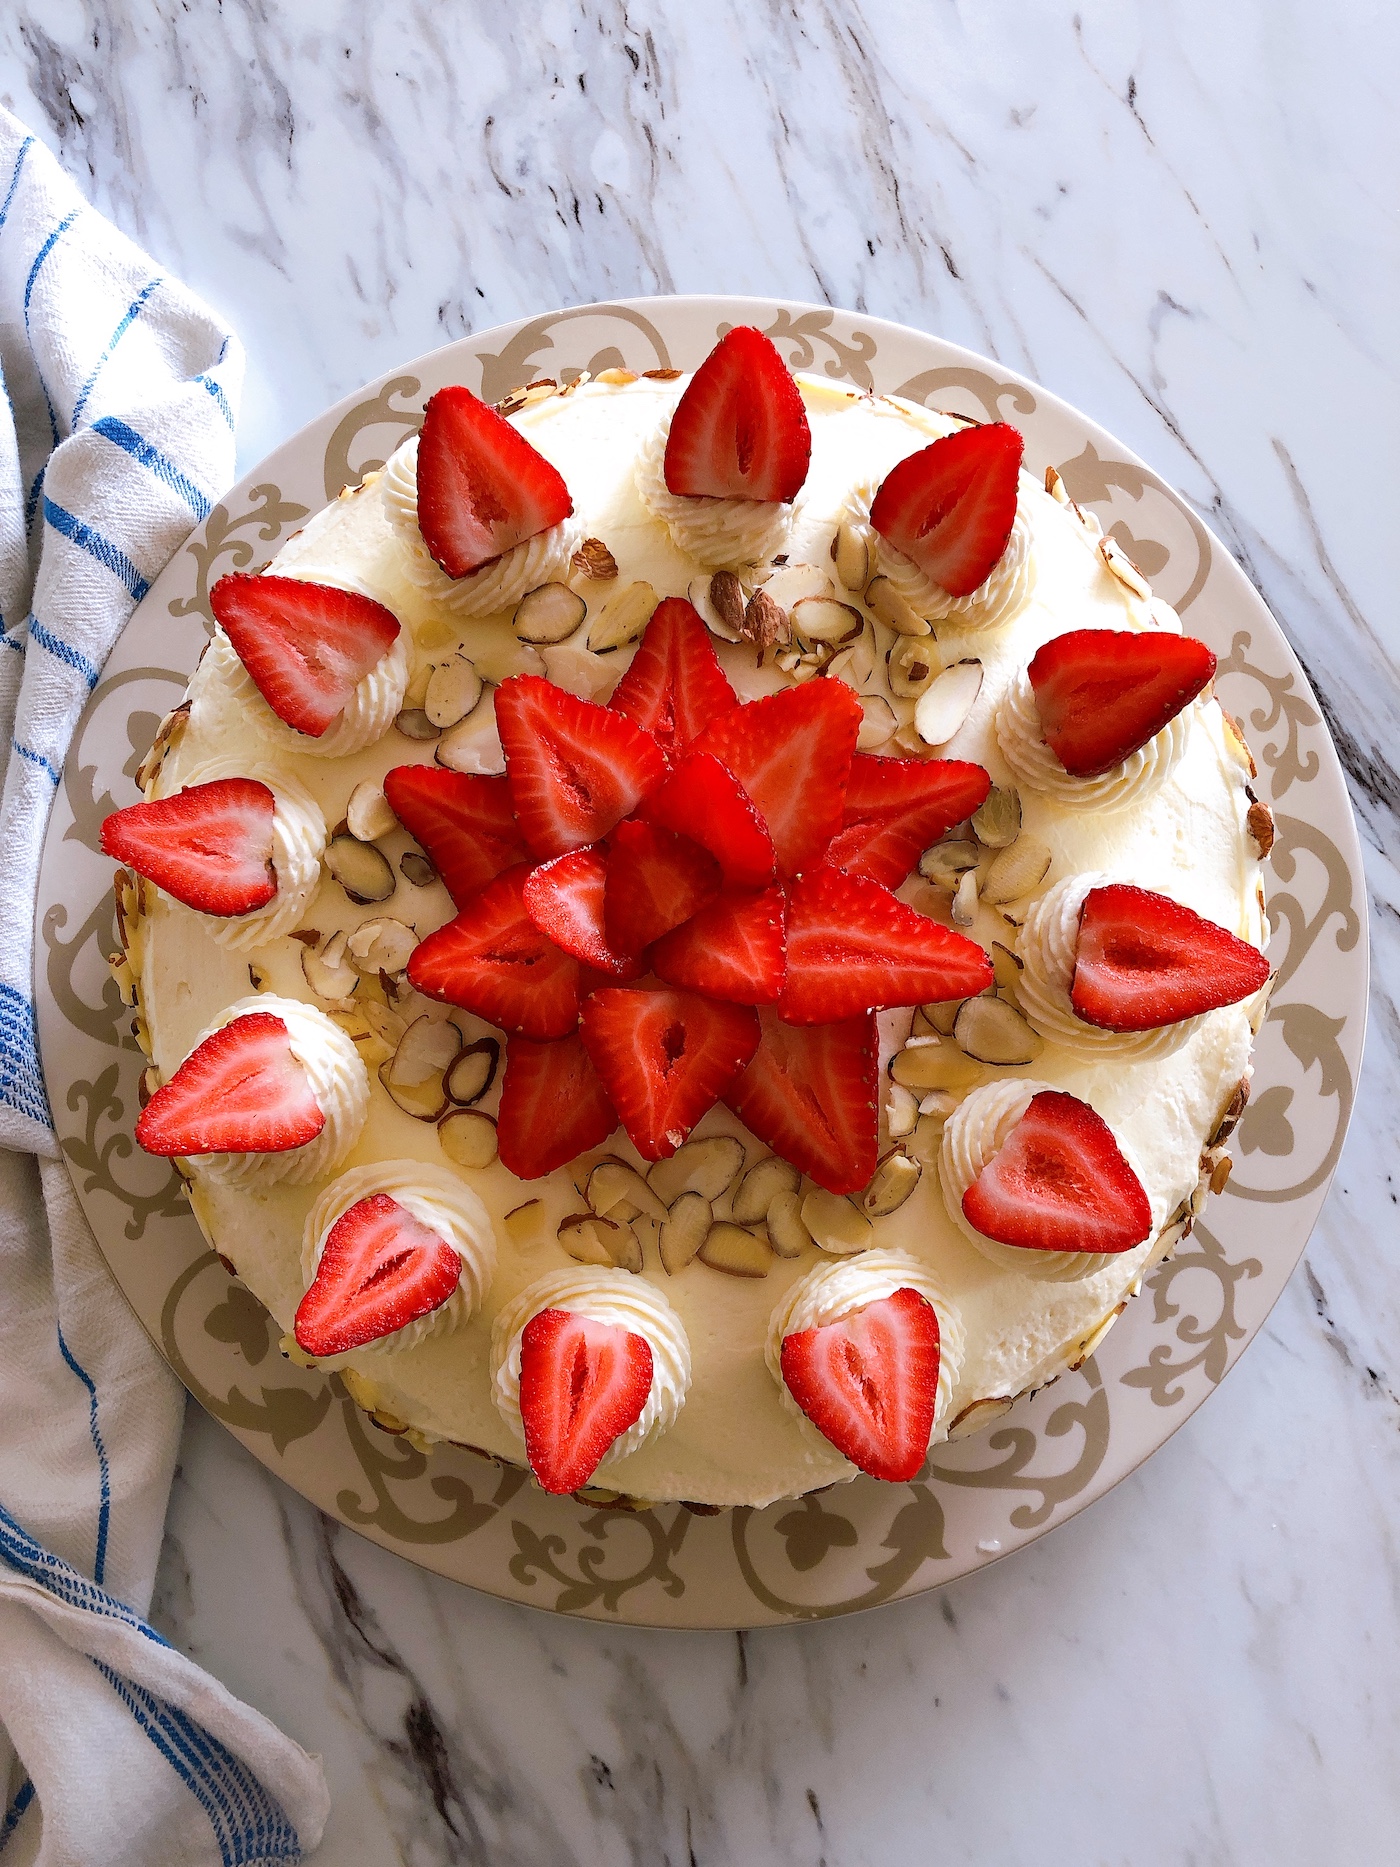 Top down view of a german buttercream spelt torte covered with sliced almonds and topped with swirls of buttercream and strawberries